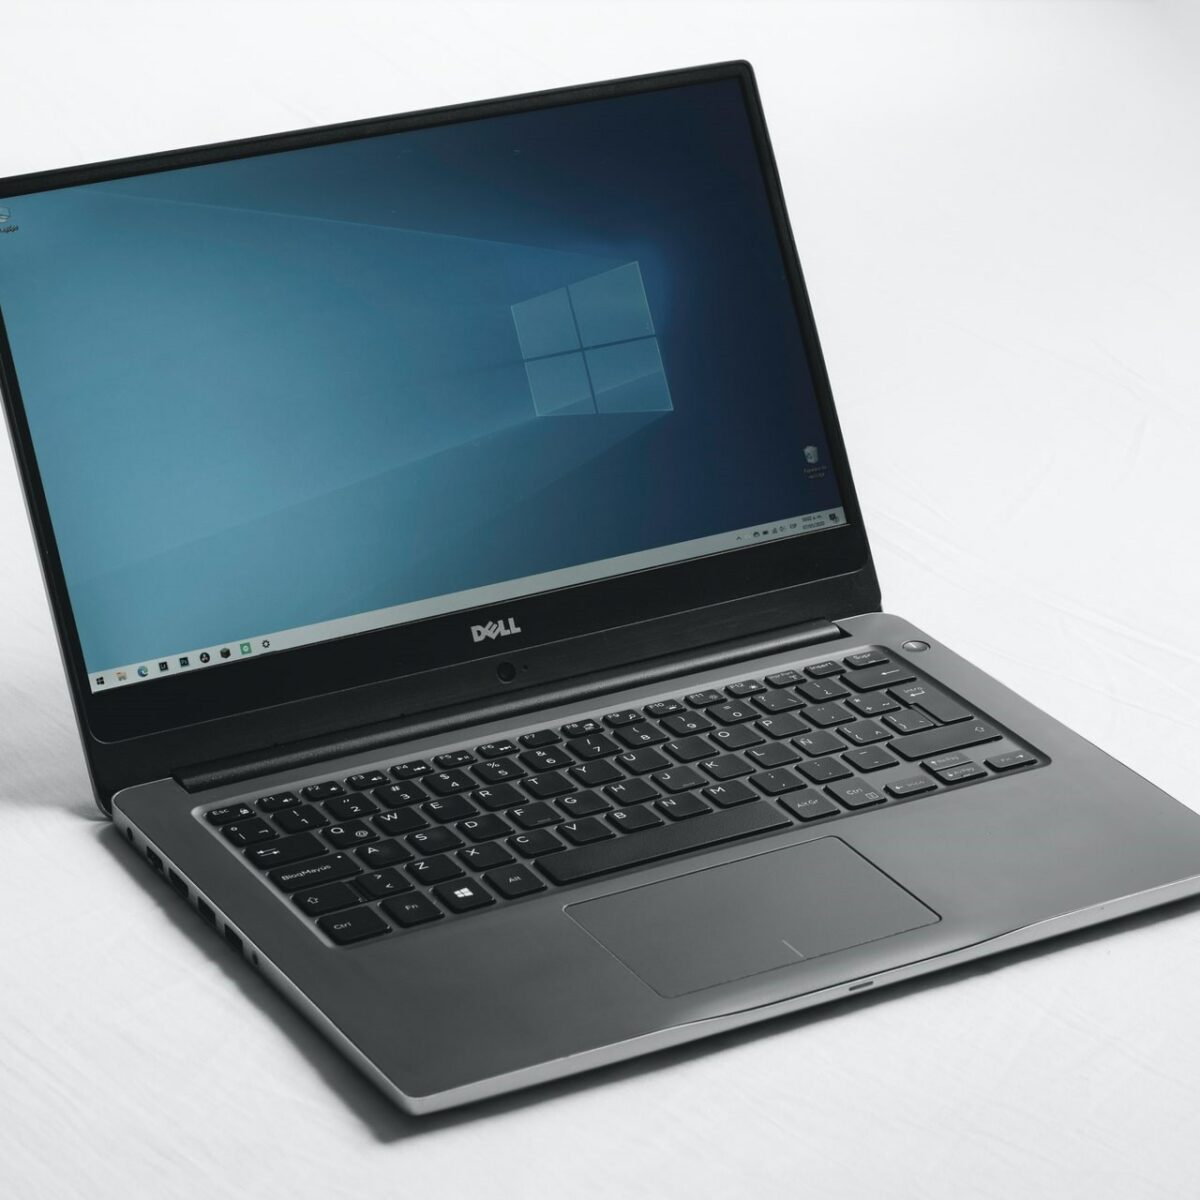 5 Laptops with SSD and HDD Speed and Performance